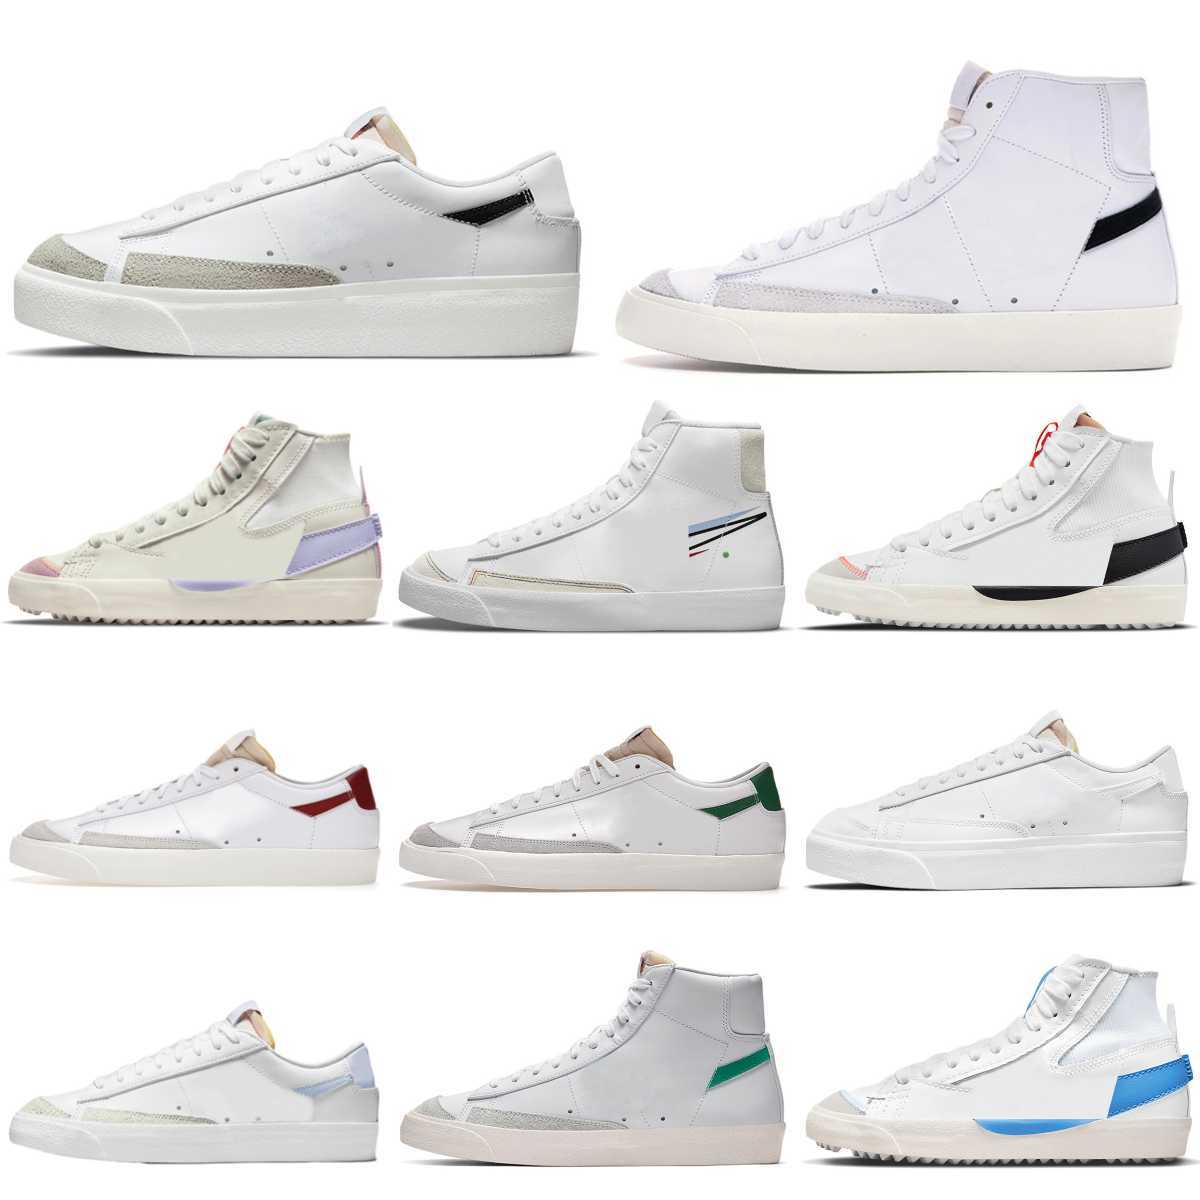 

Trainers Blazer Mid 77 High Casual Shoes Mens Women Designers Low Blazers OG Vintage Jumbo Black White Blue Red Indigo Pine Green Summit Arctic Punch Sail Gum Sneakers, Please contact us